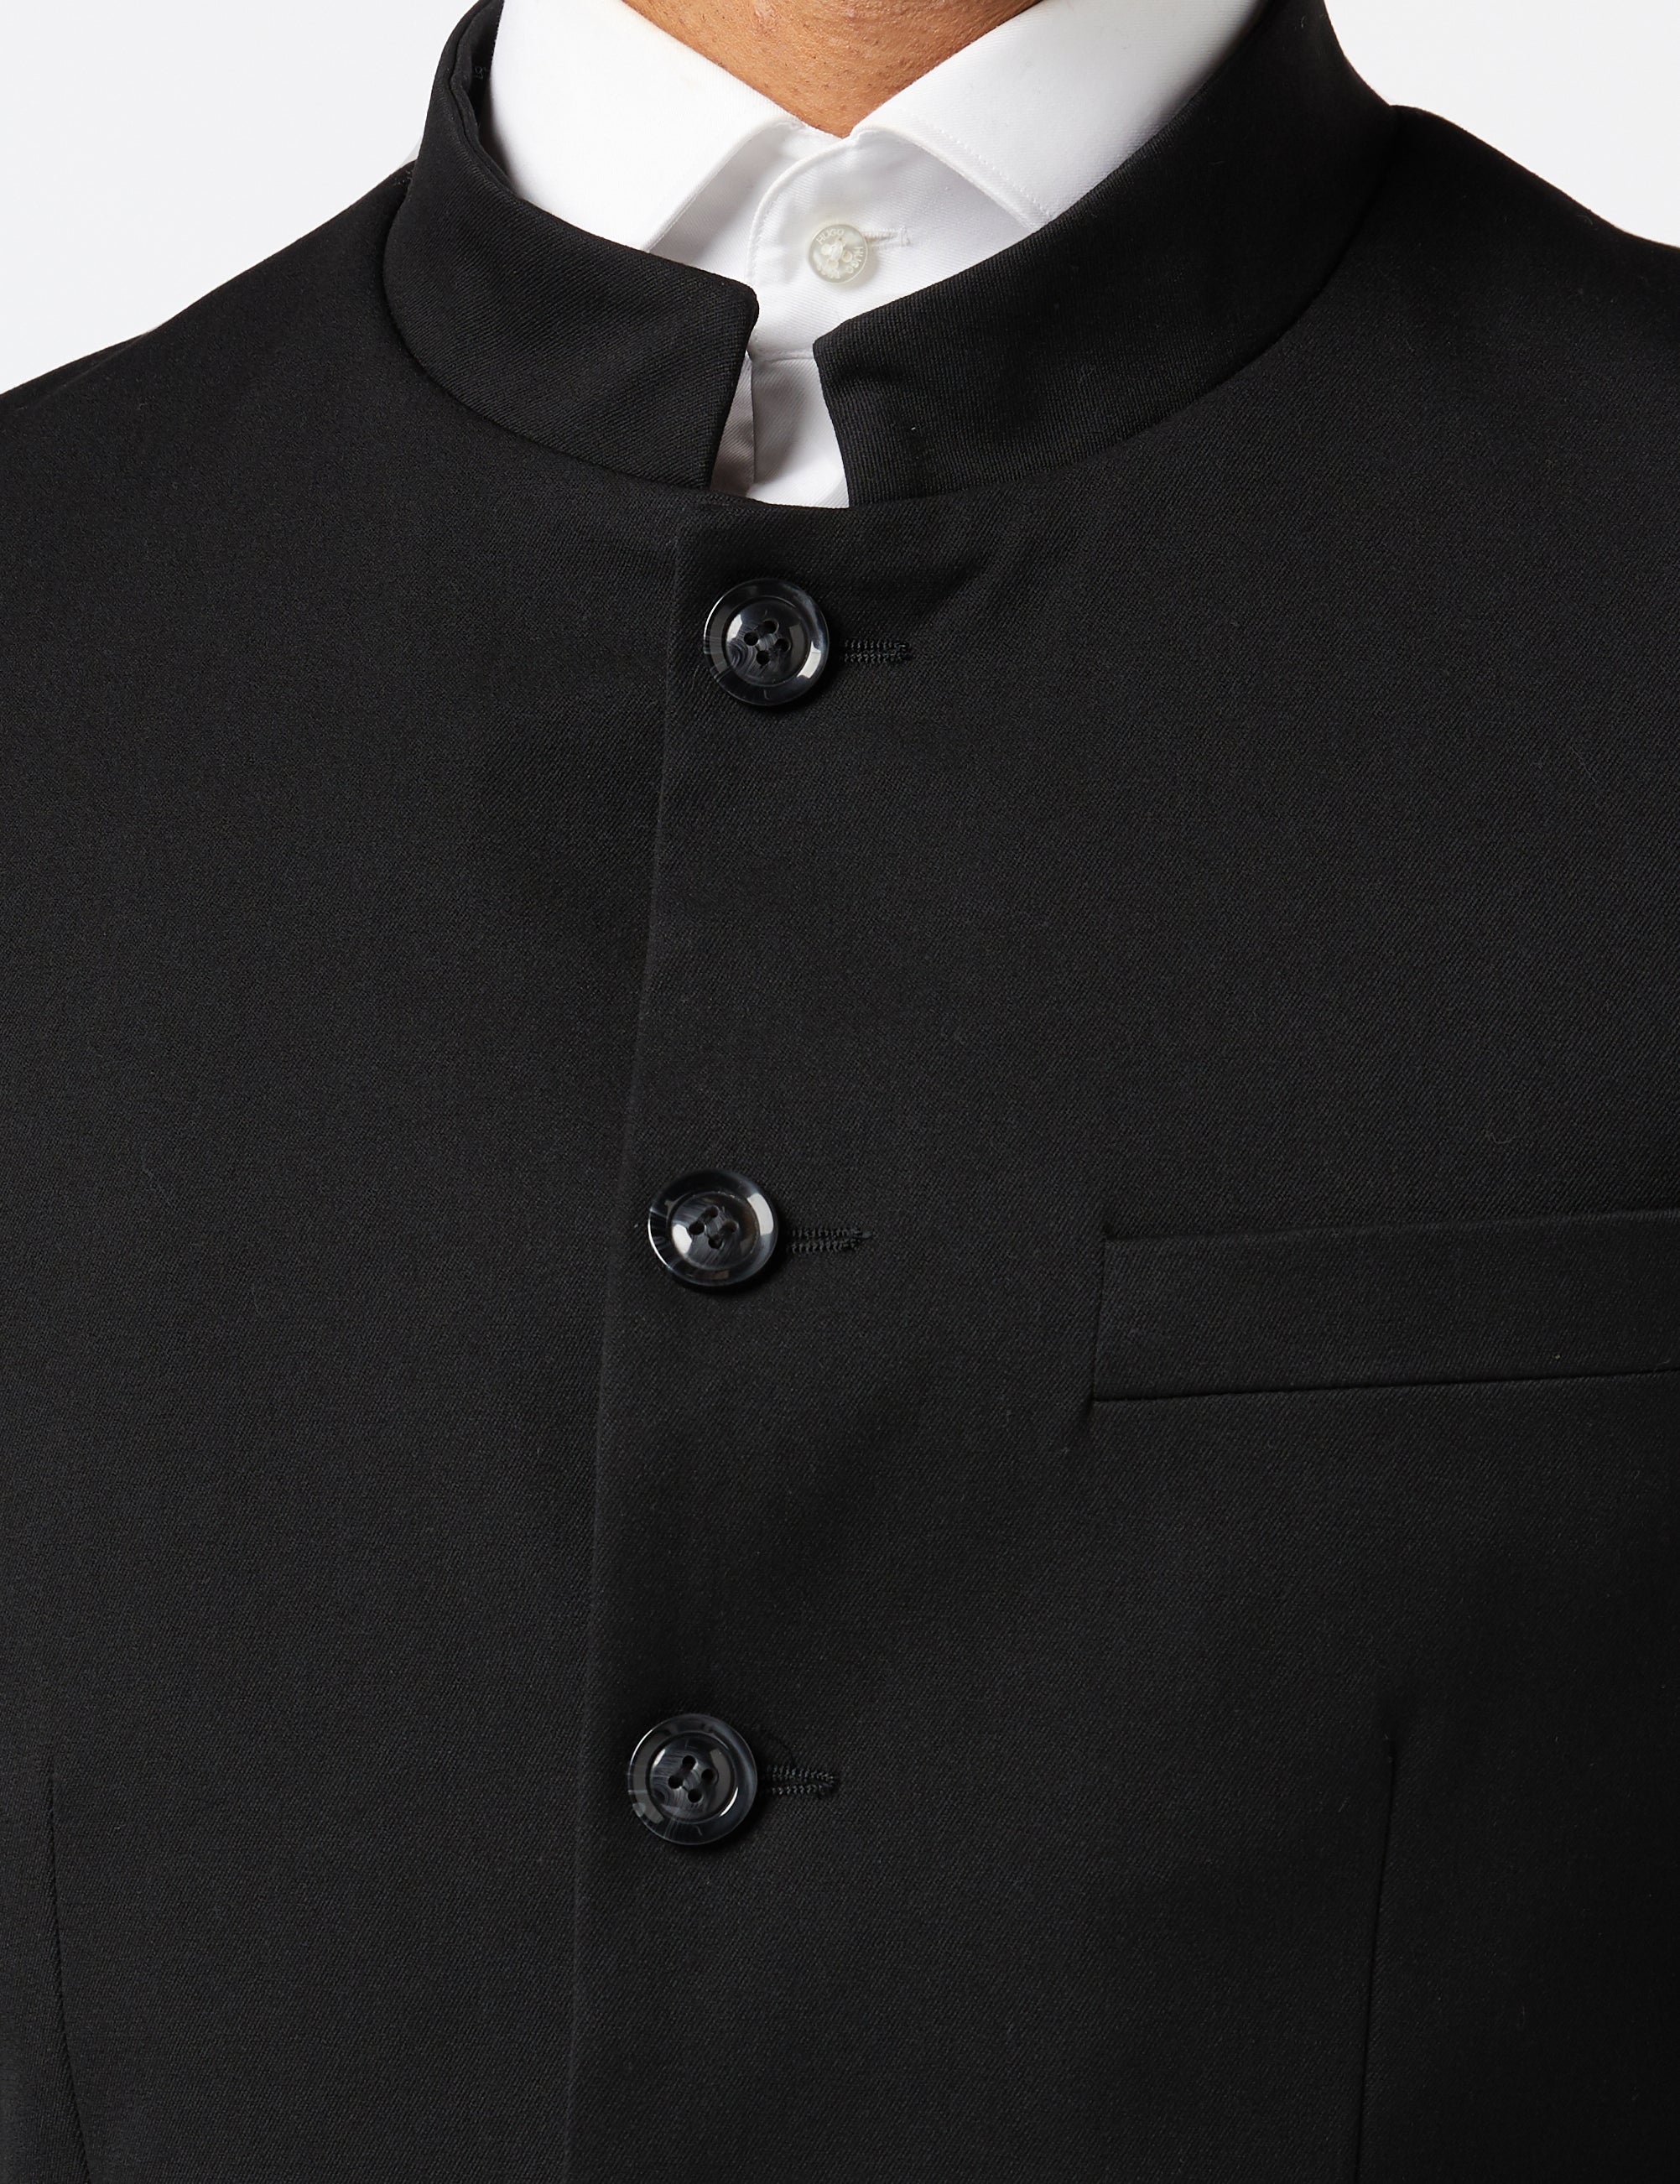 Mens Black Chinese Grandad Collar 3 Piece Suit Fitted Nehru Jacket Wedding Party